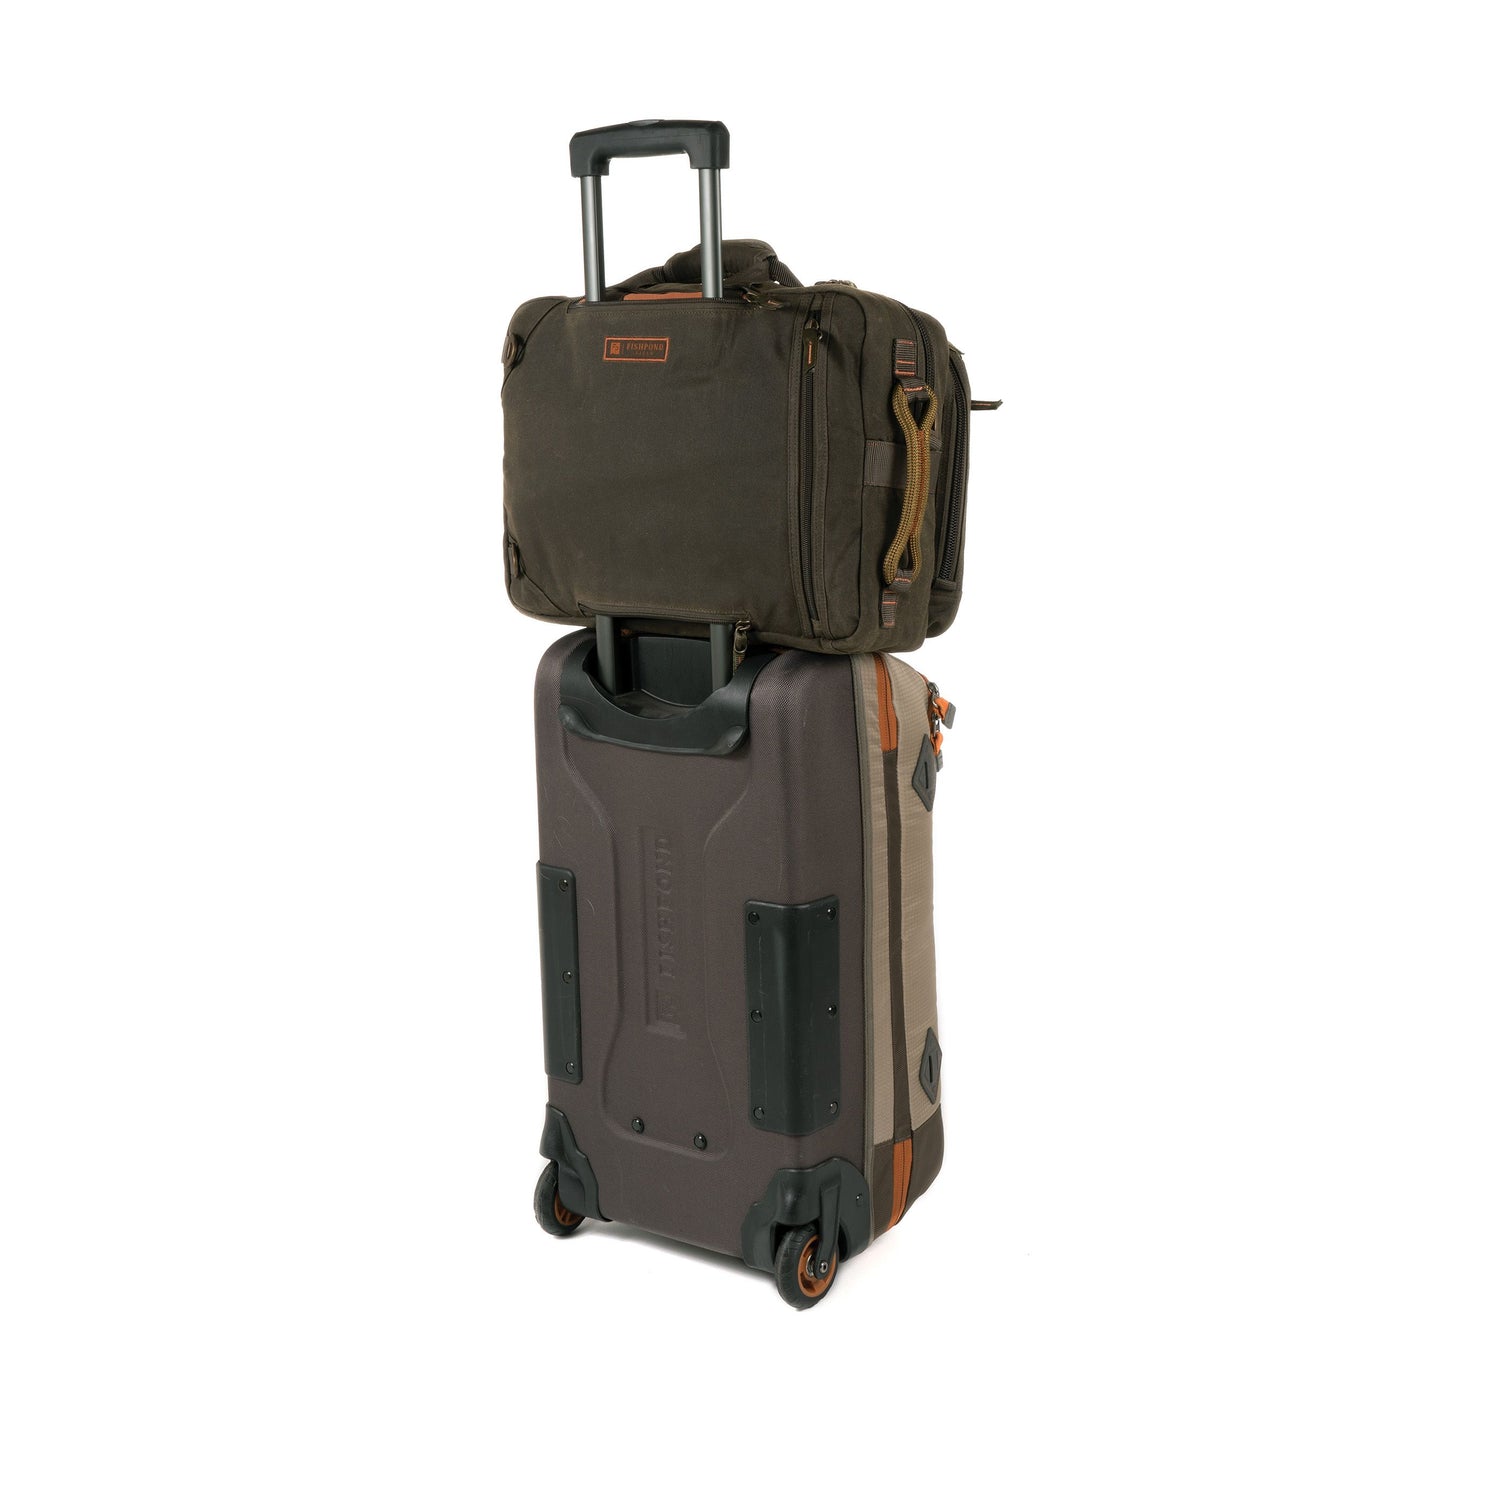  Peat Moss Boulder Briefcase Luggage